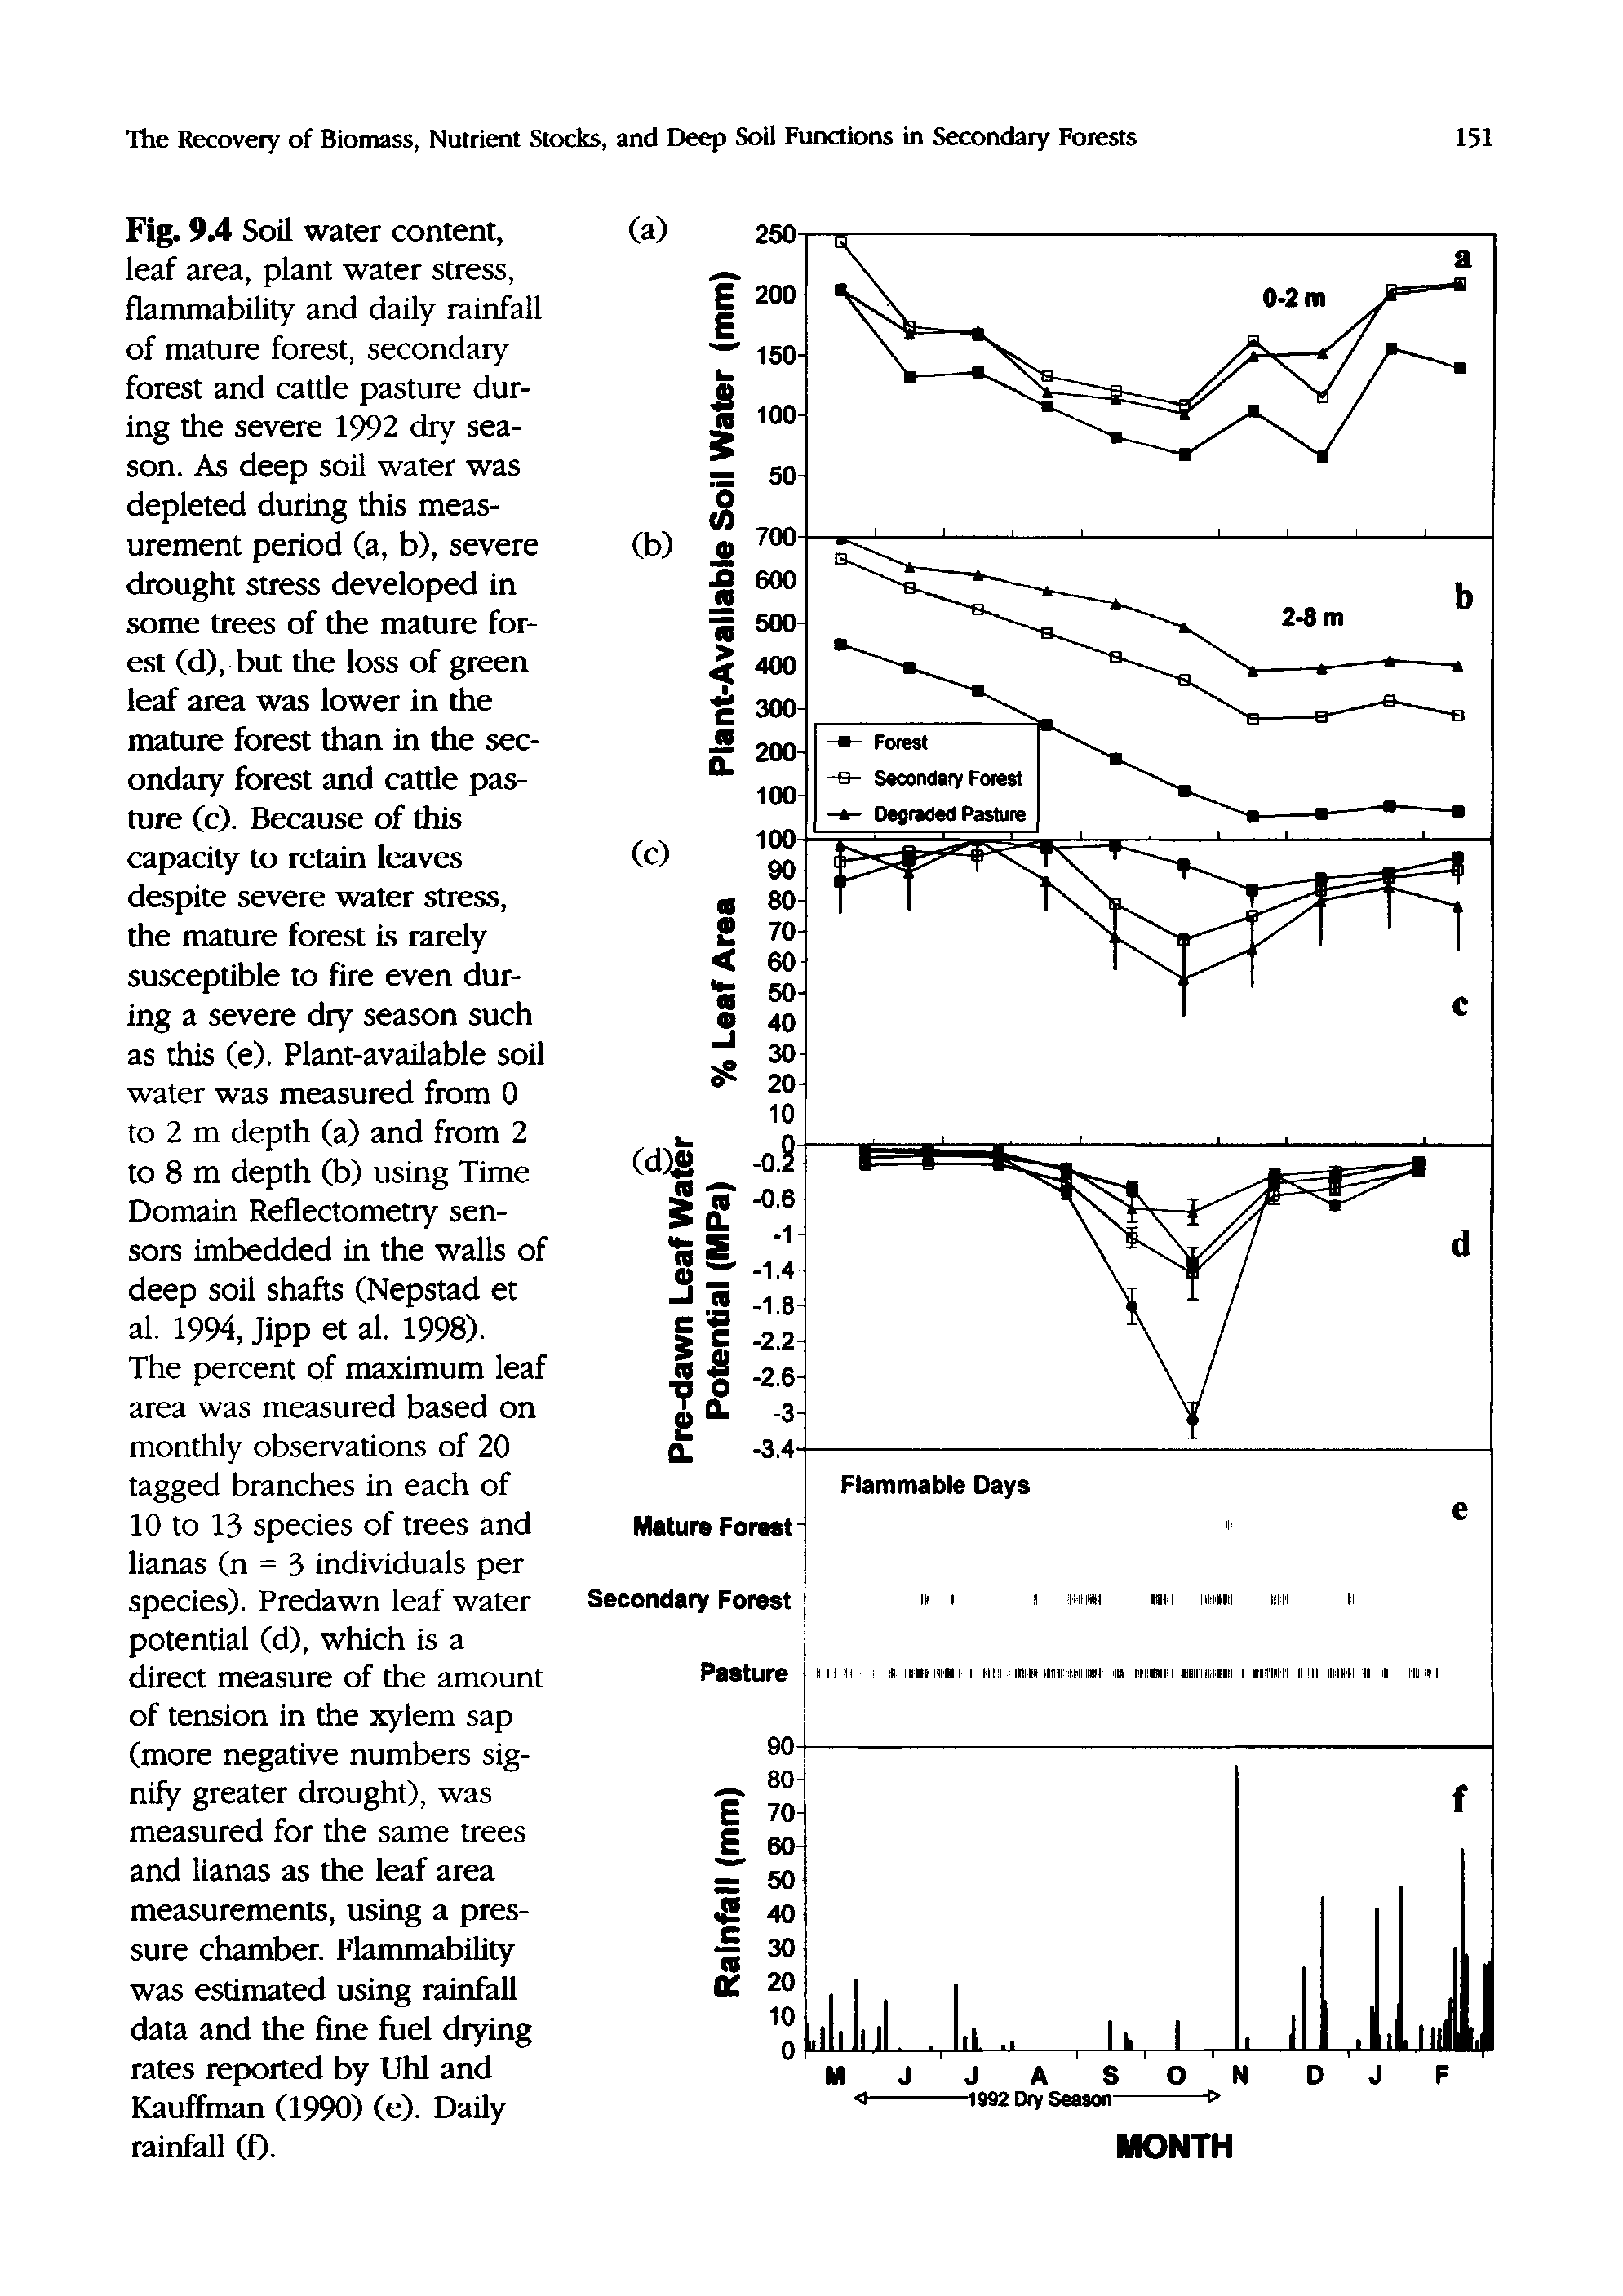 Fig. 9.4 Soil water content, leaf area, plant water stress, flammability and daily rainfall of mature forest, secondary forest and cattle pasture during the severe 1992 dry season. As deep soil water was depleted during this measurement period (a, b), severe drought stress developed in some trees of the mature forest (d), but the loss of green leaf area was lower in the mature forest than in the secondary forest and cattle pasture (c). Because of this capacity to retain leaves despite severe water stress, the mature forest is rarely susceptible to fire even during a severe dry season such as this (e). Plant-available soil water was measured from 0 to 2 m depth (a) and from 2 to 8 m depth (b) using Time Domain Reflectometry sensors imbedded in the walls of deep soil shafts (Nepstad et al. 1994, Jipp et al. 1998).